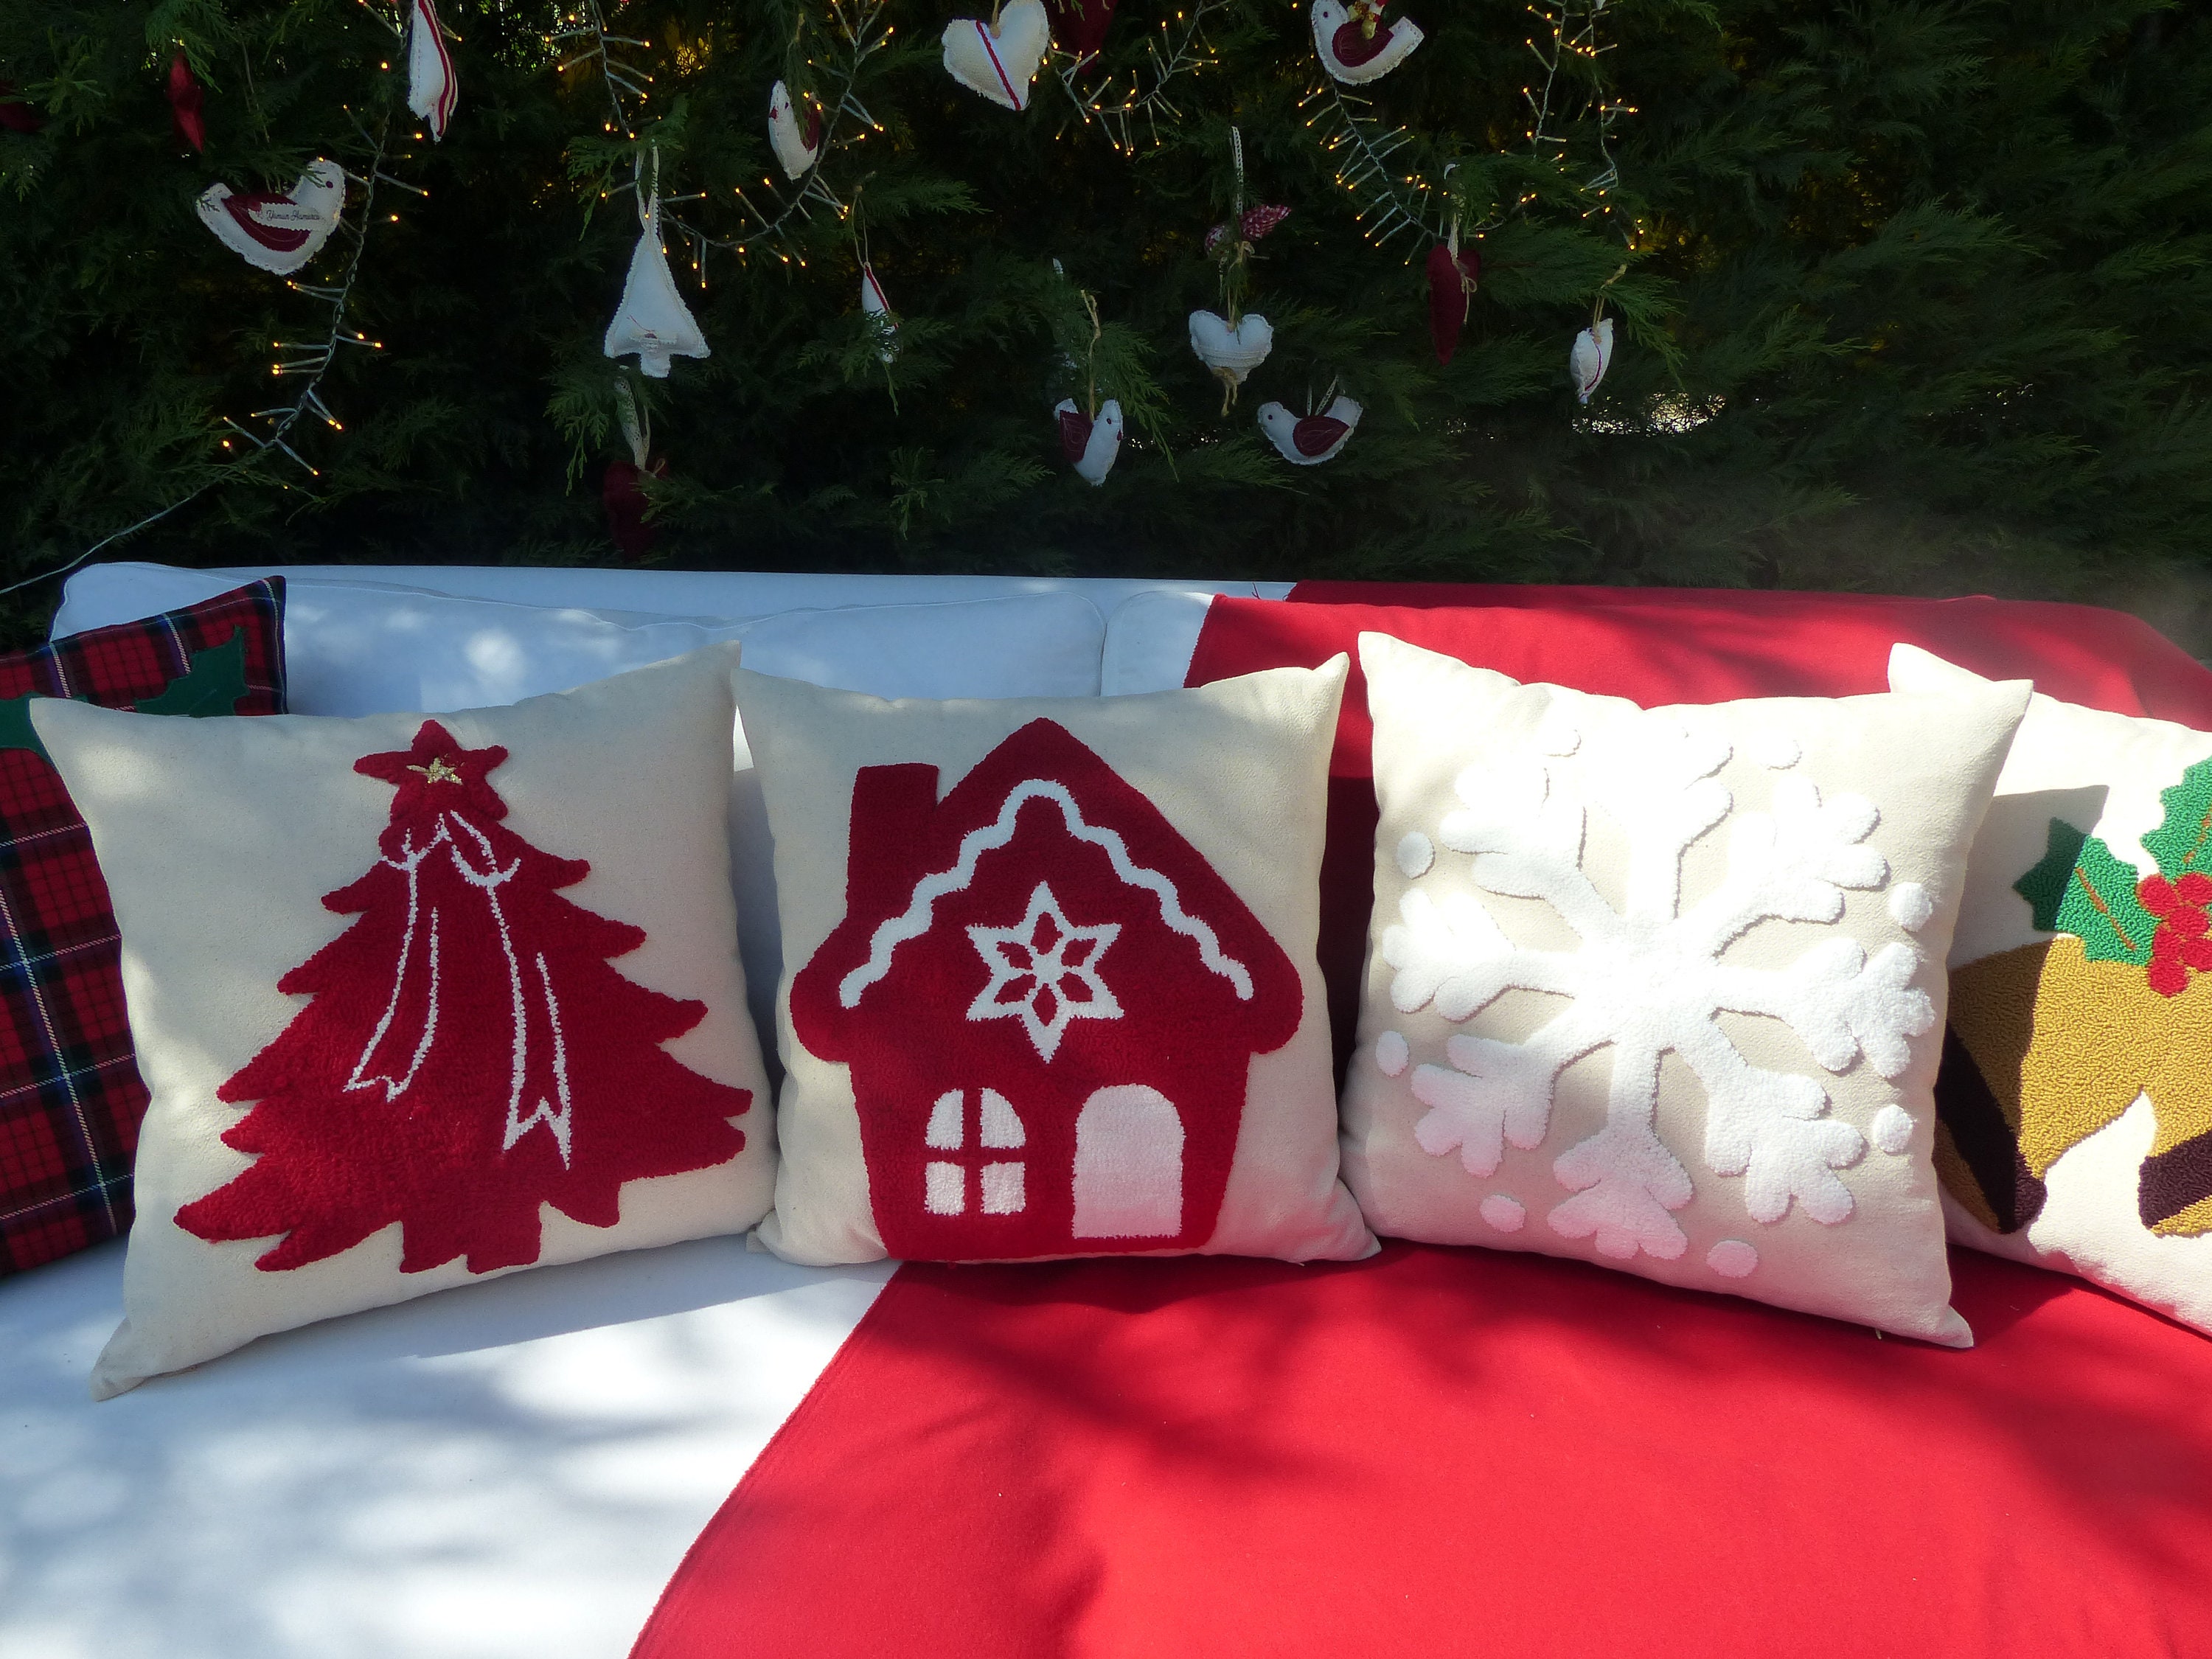 Christmas Pillow Covers 17.7x17.7 For Christmas Decorations